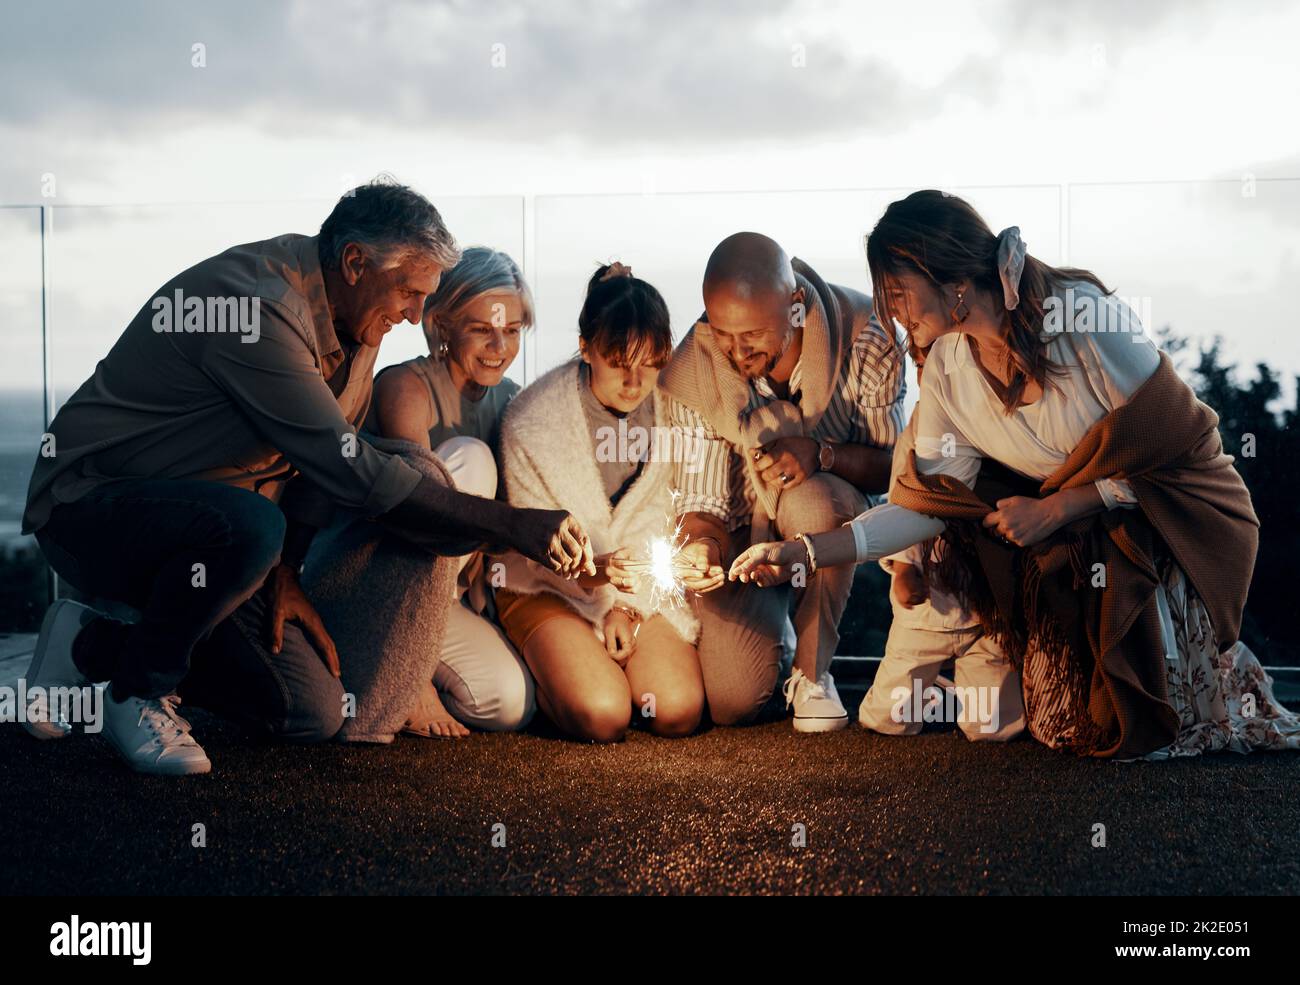 Its time for some lights. Full length shot of an affectionate family lighting up sparklers while celebrating a new year outdoors. Stock Photo